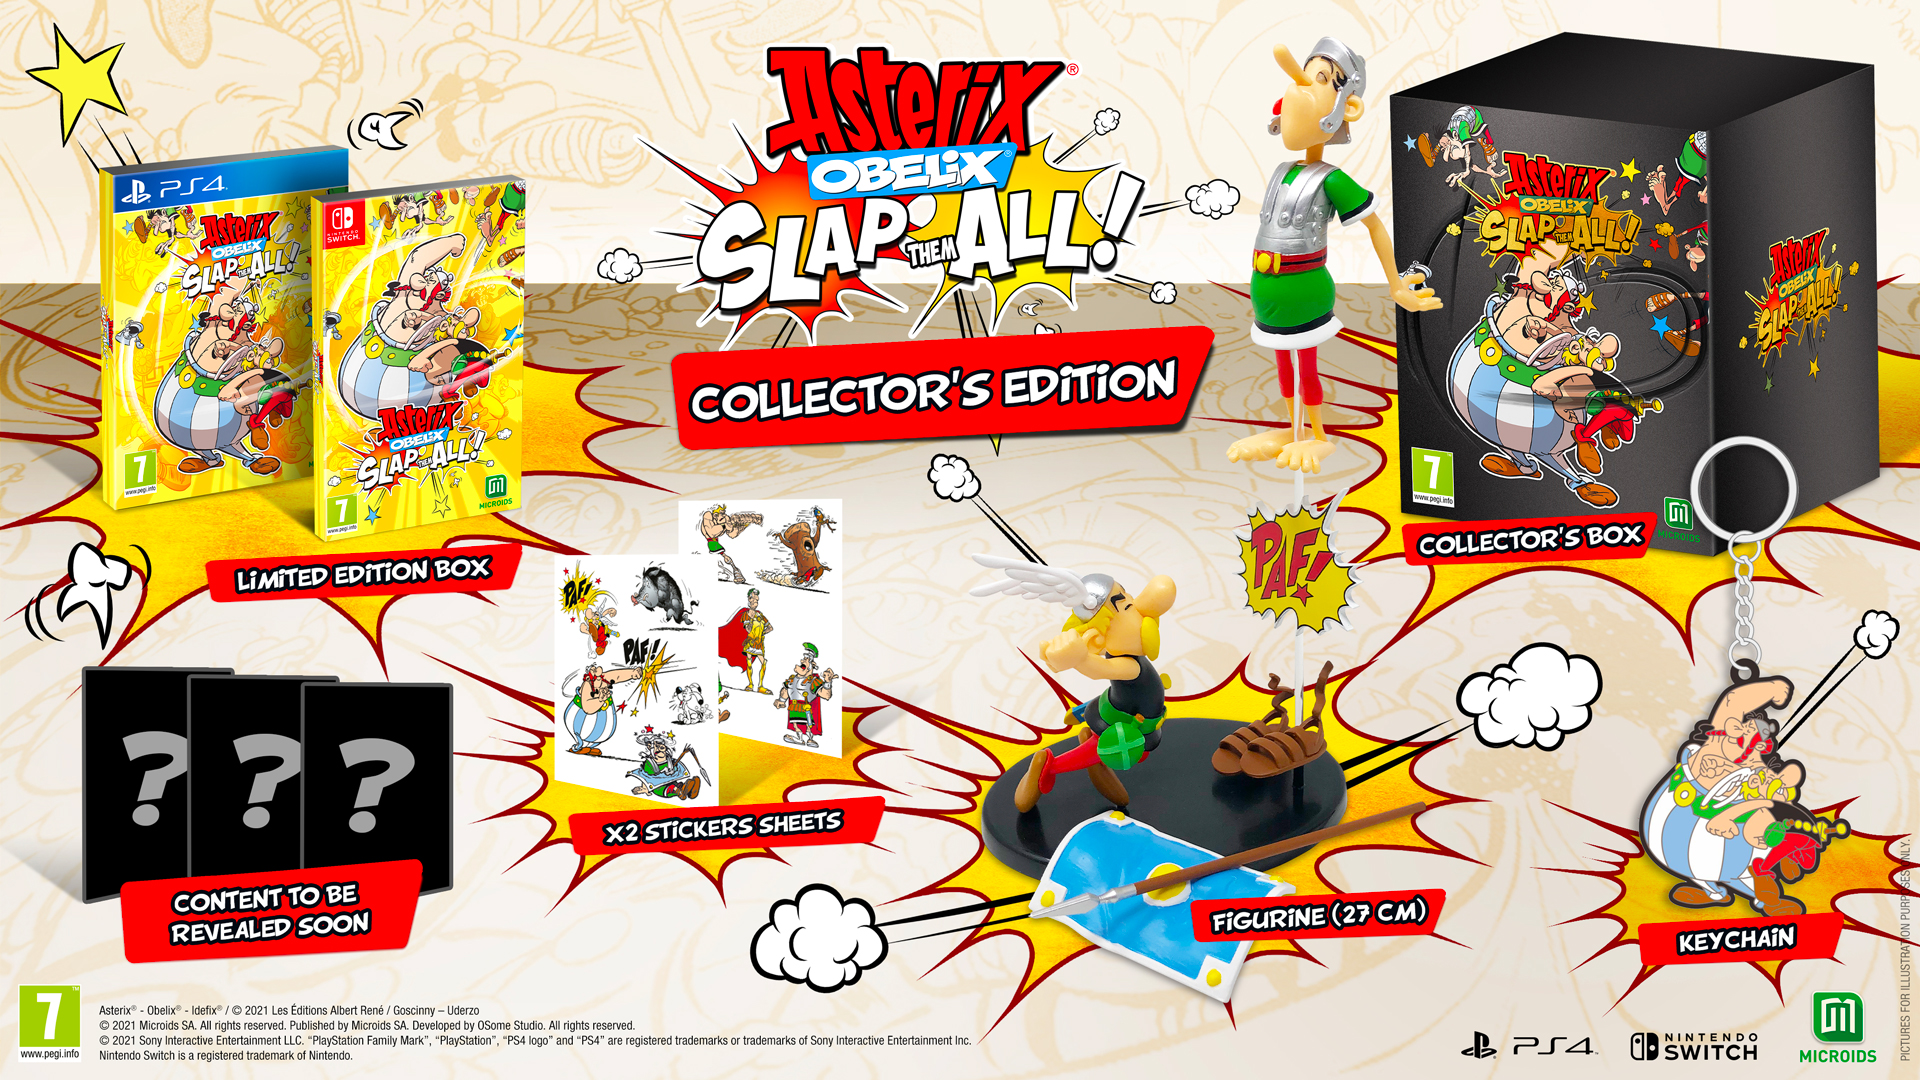 Microids on Twitter: "Discover the collector's and limited edition of the game &amp; Obelix: Slap All! Asterix &amp; Slap All! will launch in Fall 2021 on PS4, Xbox